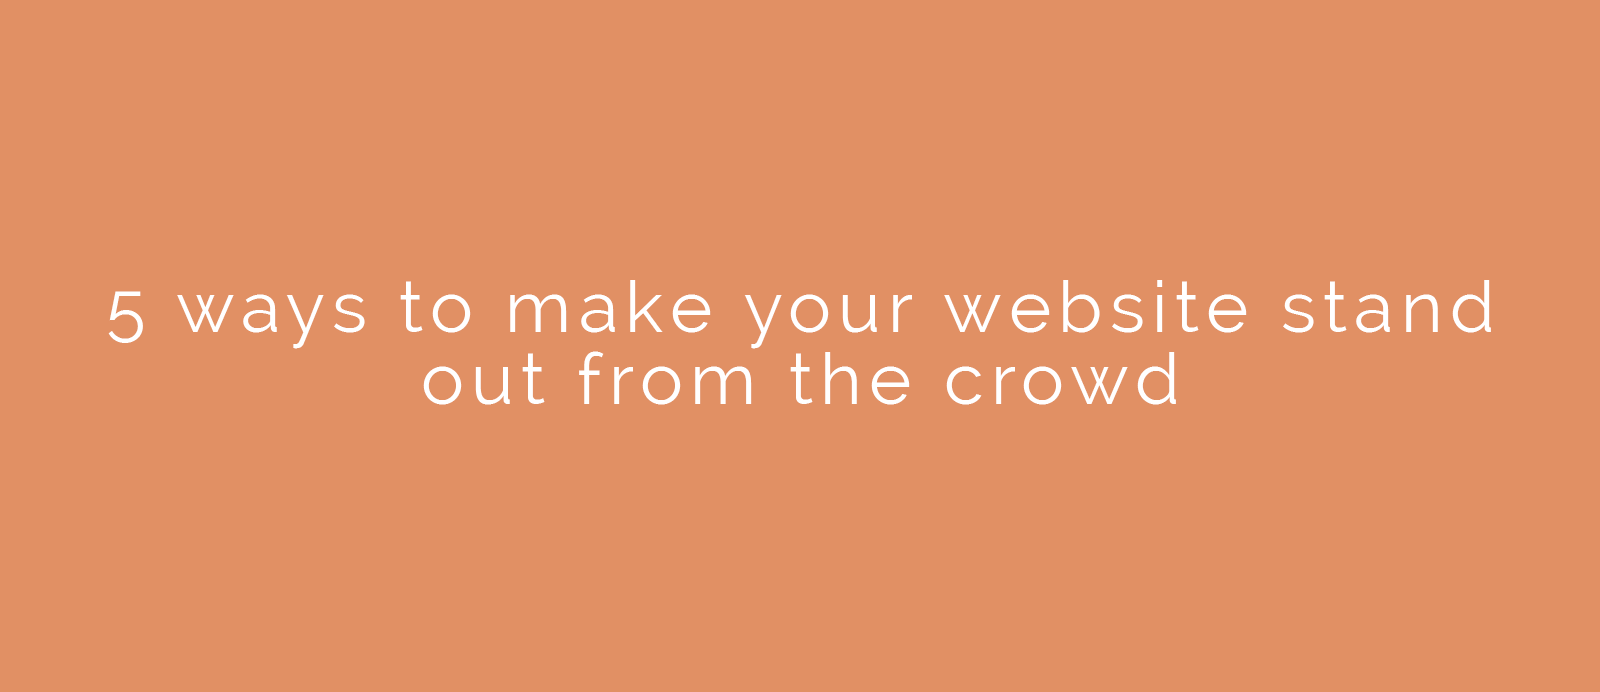 website stand out from the crowd